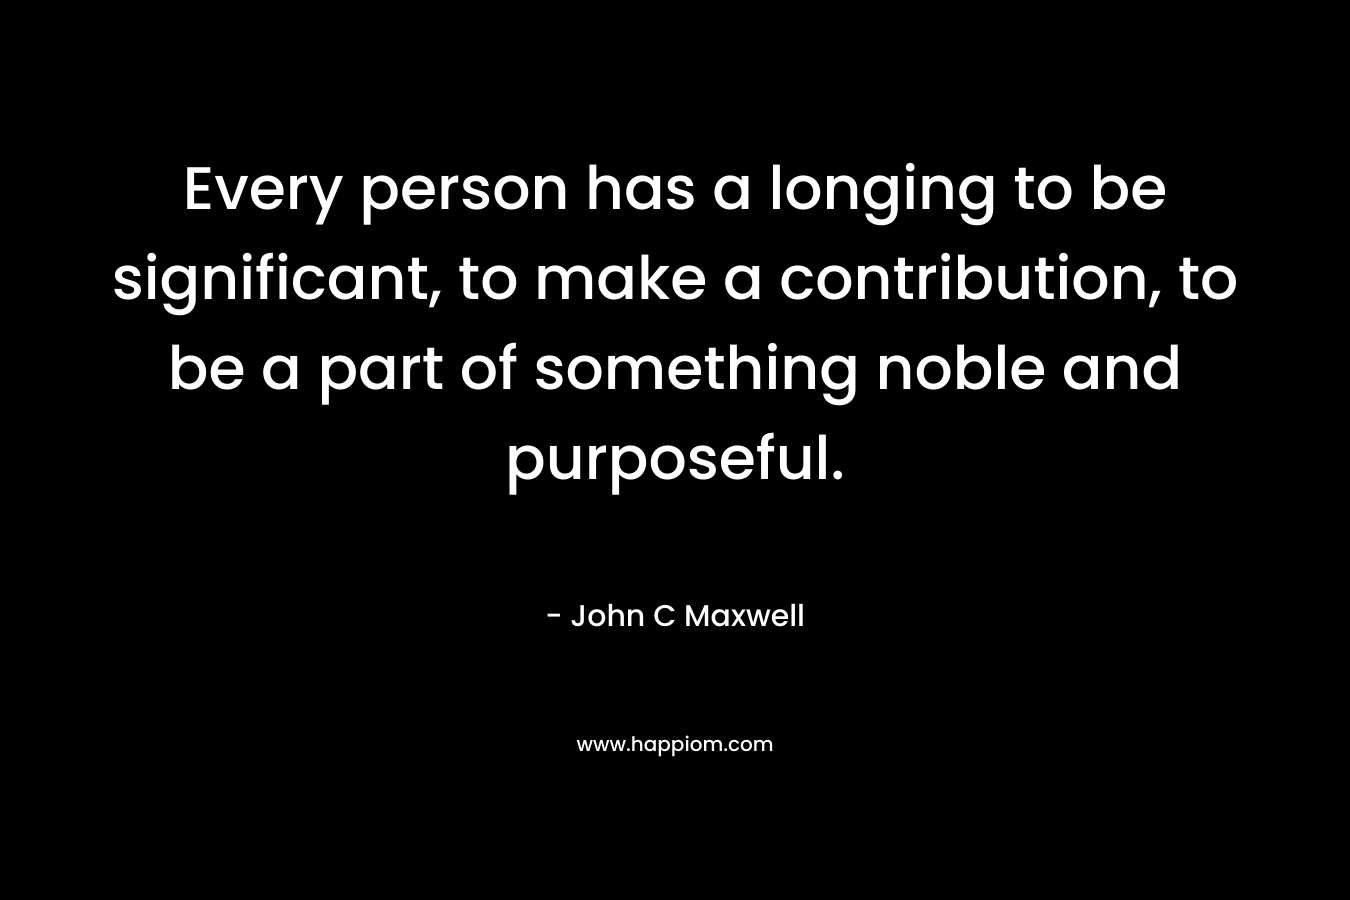 Every person has a longing to be significant, to make a contribution, to be a part of something noble and purposeful. – John C Maxwell